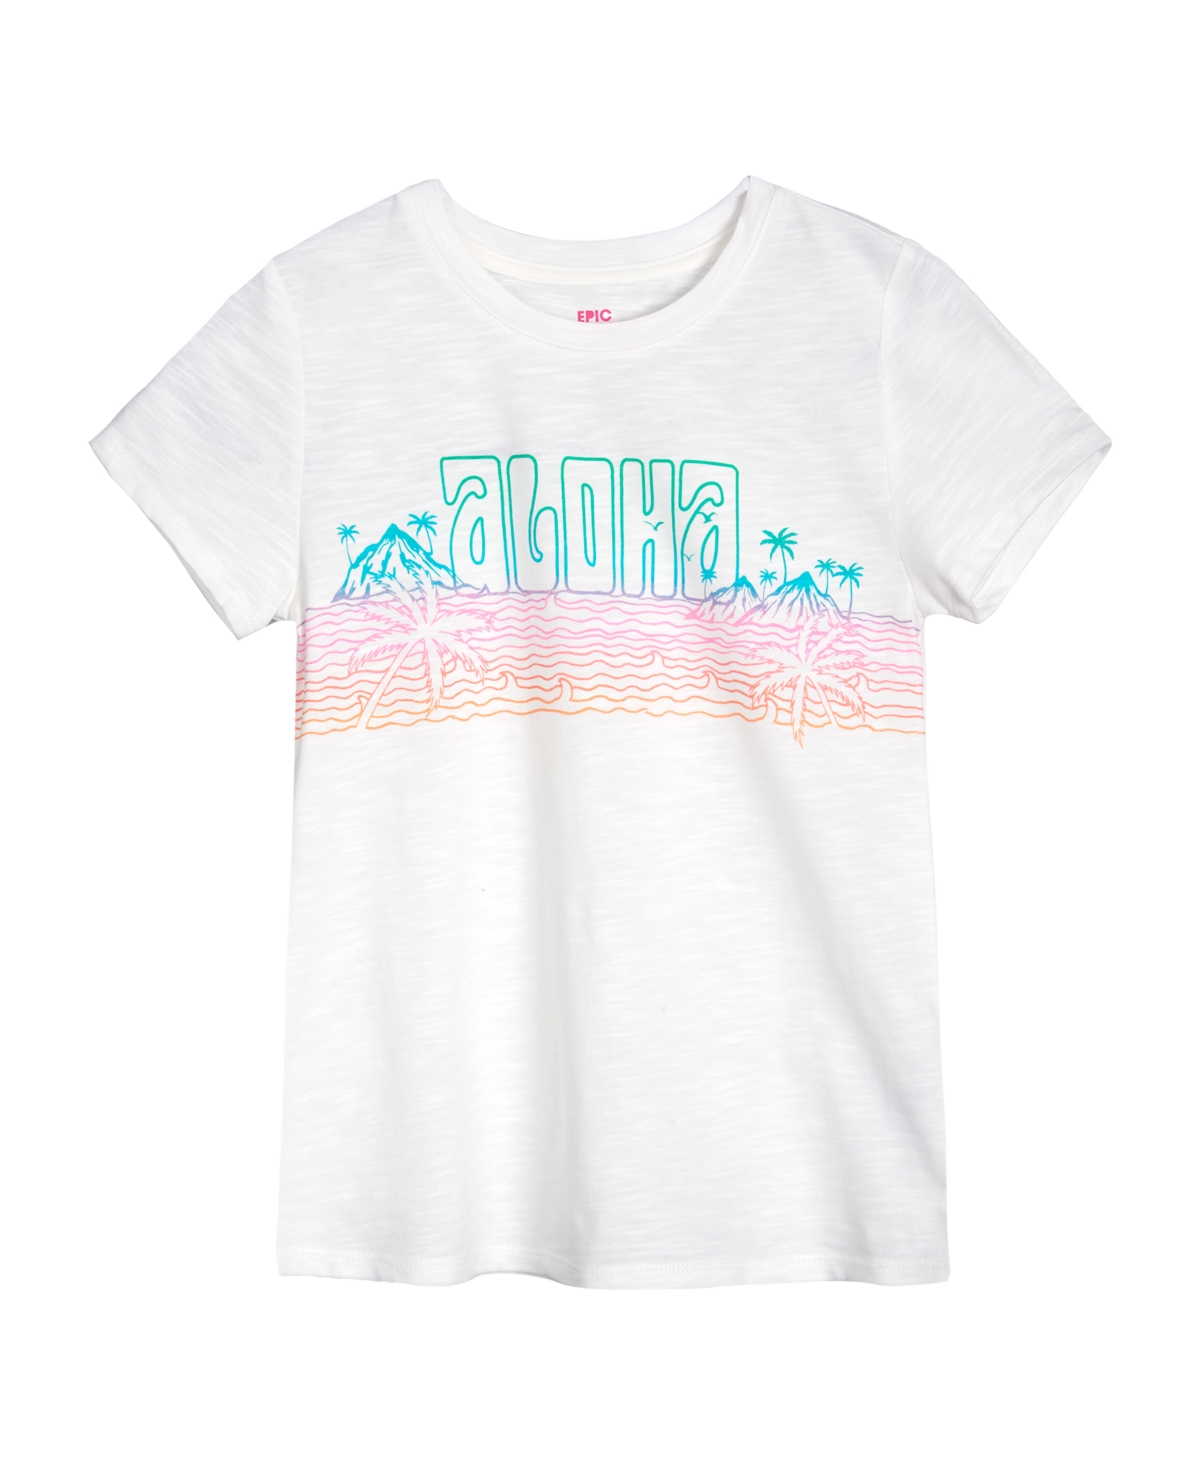 Details about   Epic Threads Toddler Girls Colorblocked T-Shirt 